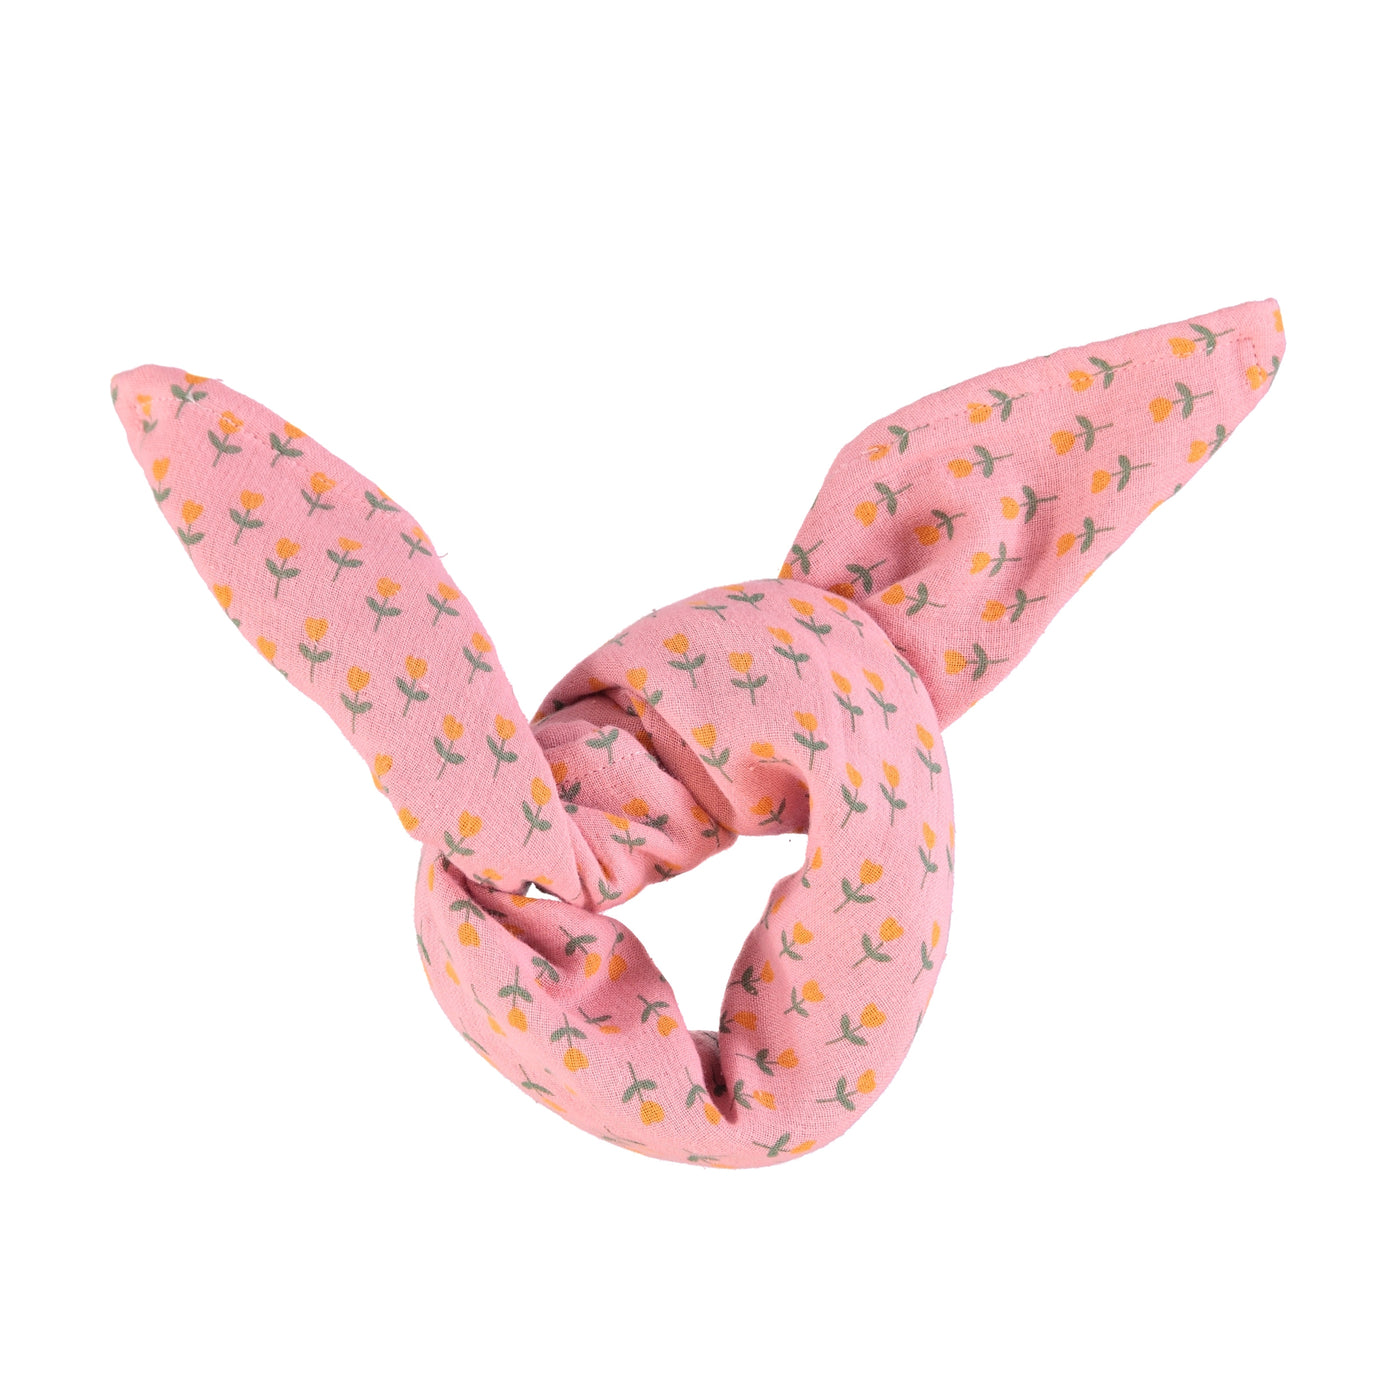 Bandana | pink with little flowers